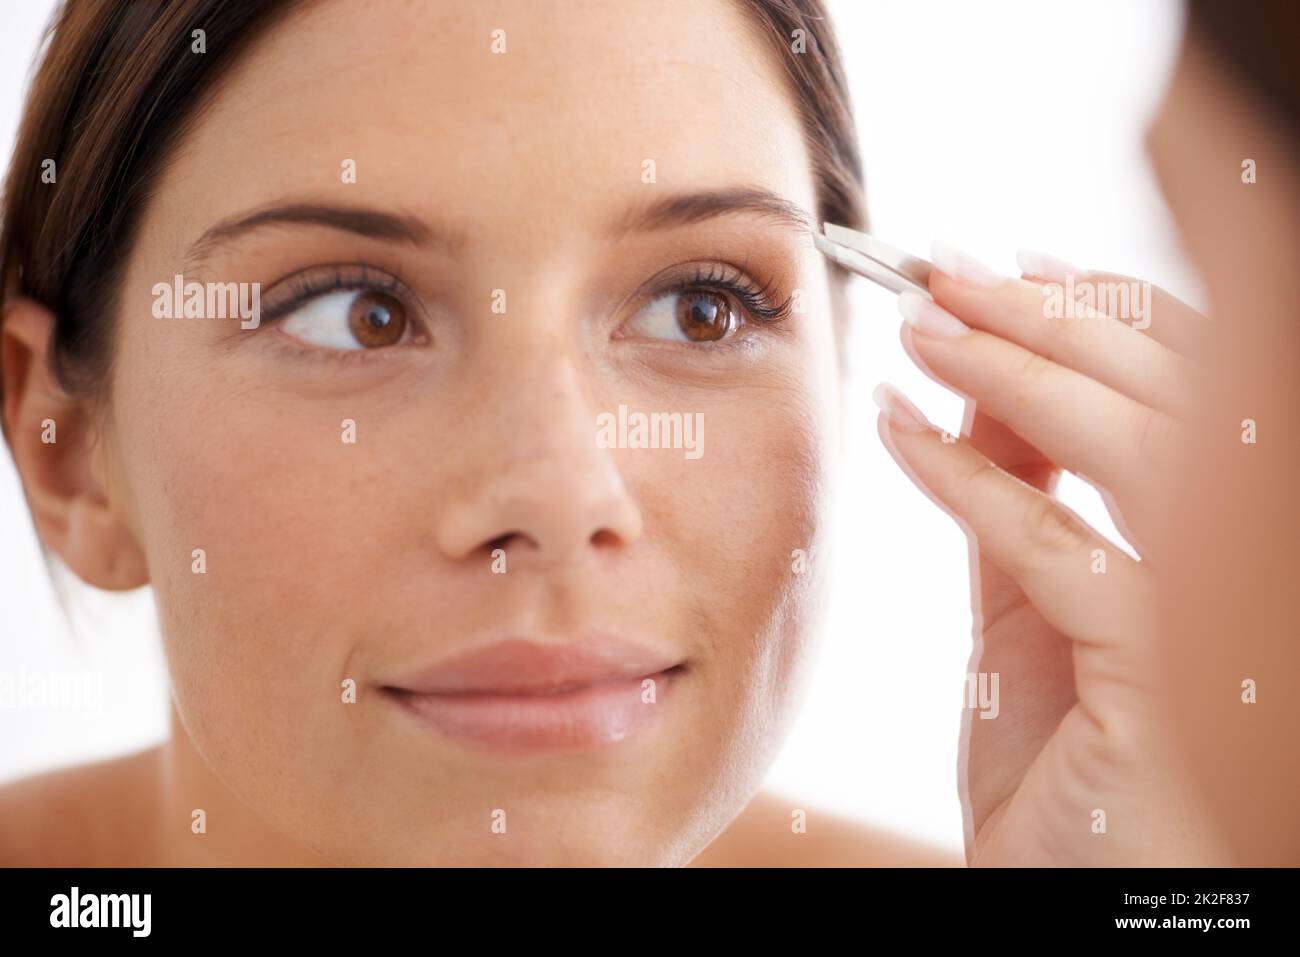 Shes already perfect. An attractive young woman plucking her eyebrows. Stock Photo